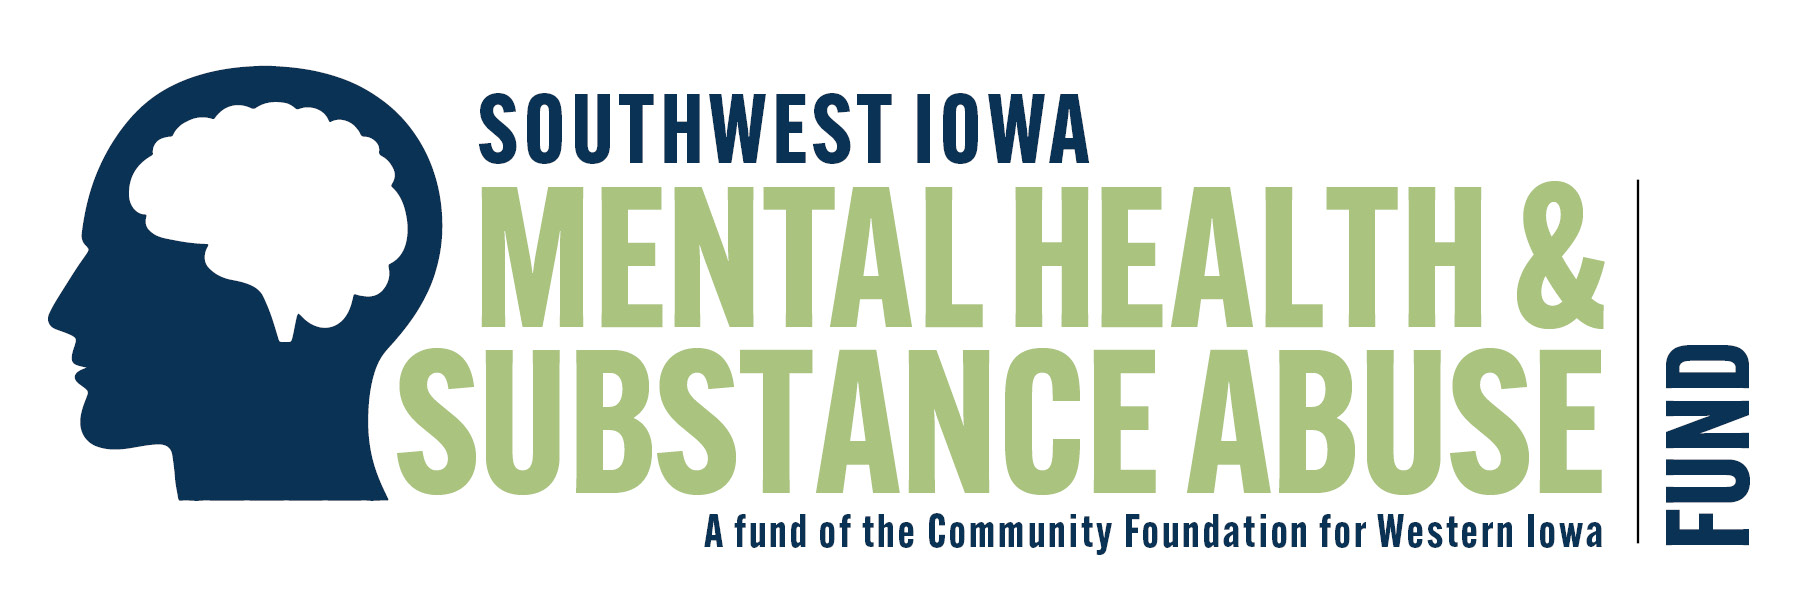 Mental Health and Substance Abuse Fund